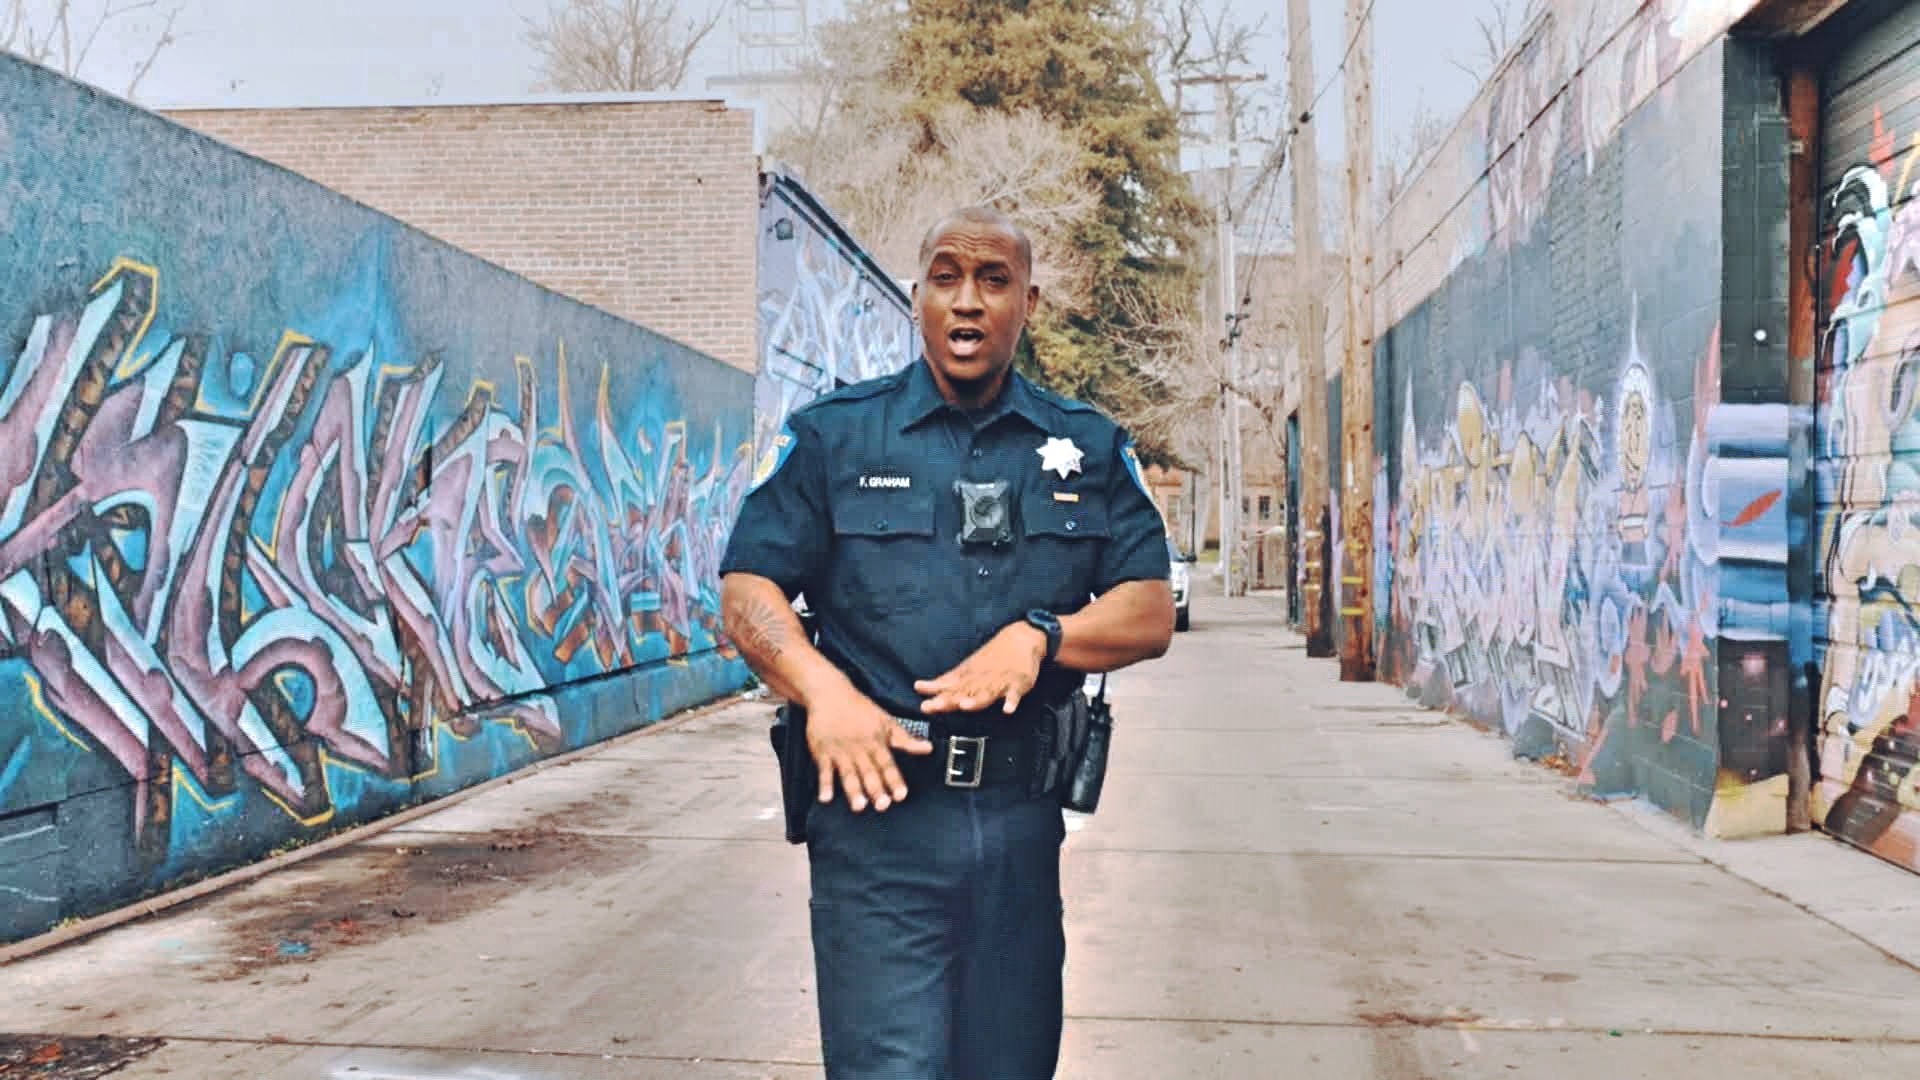 Sacramento Police Department Officer Filmore Graham is a Grammy-nominated rapper, and he's now using his talents to help recruit new officers for the department.